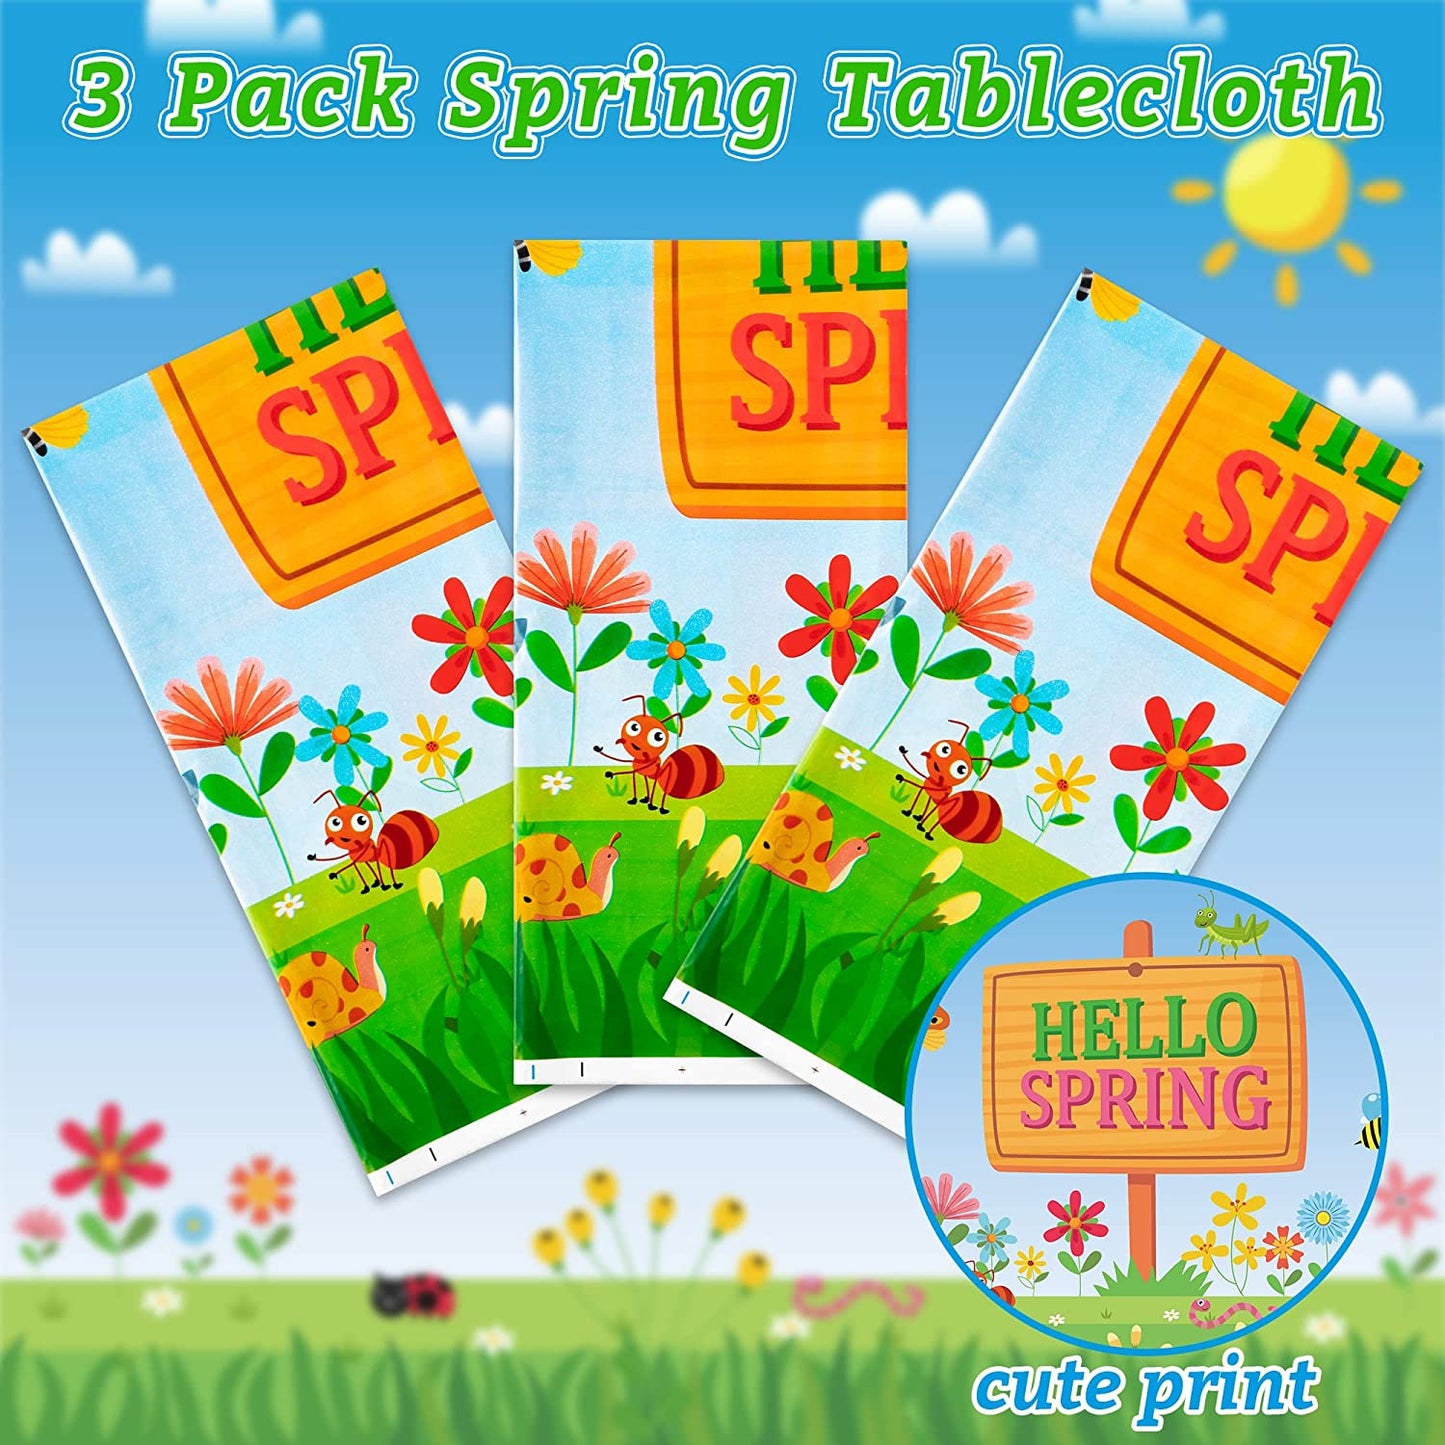 BkeeCten 3 Packs Hello Spring Party Table Covers Decorations Spring Floral Plastic Table Cloths Disposable Waterproof Rectangle Tablecover for Spring Easter Party Kitchen Dinner Table Decor Supplies